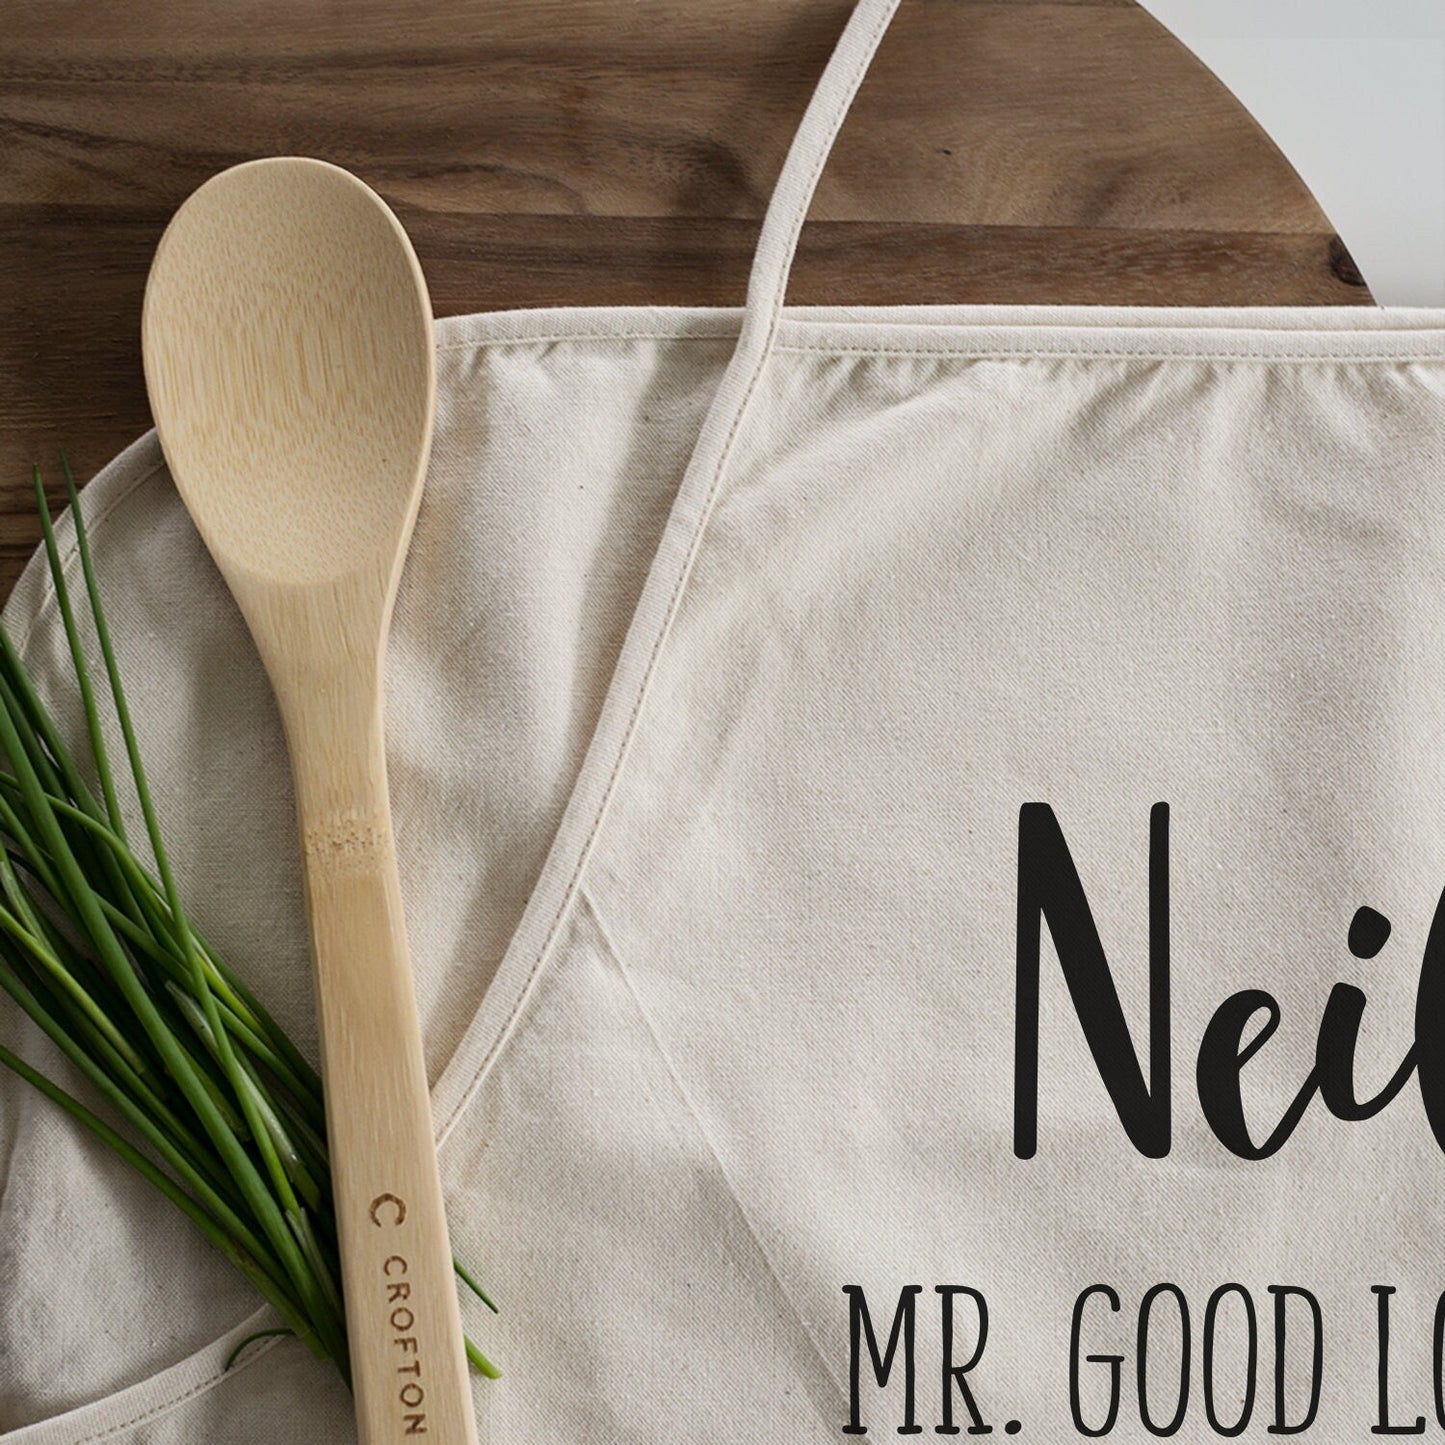 Load image into Gallery viewer, Mr. Good Lookin is Cookin | Grilling Apron | Funny Kitchen Apron for Dad | Fathers Day Apron Gift | BBQ Grill Gift for Dad | Personalized
